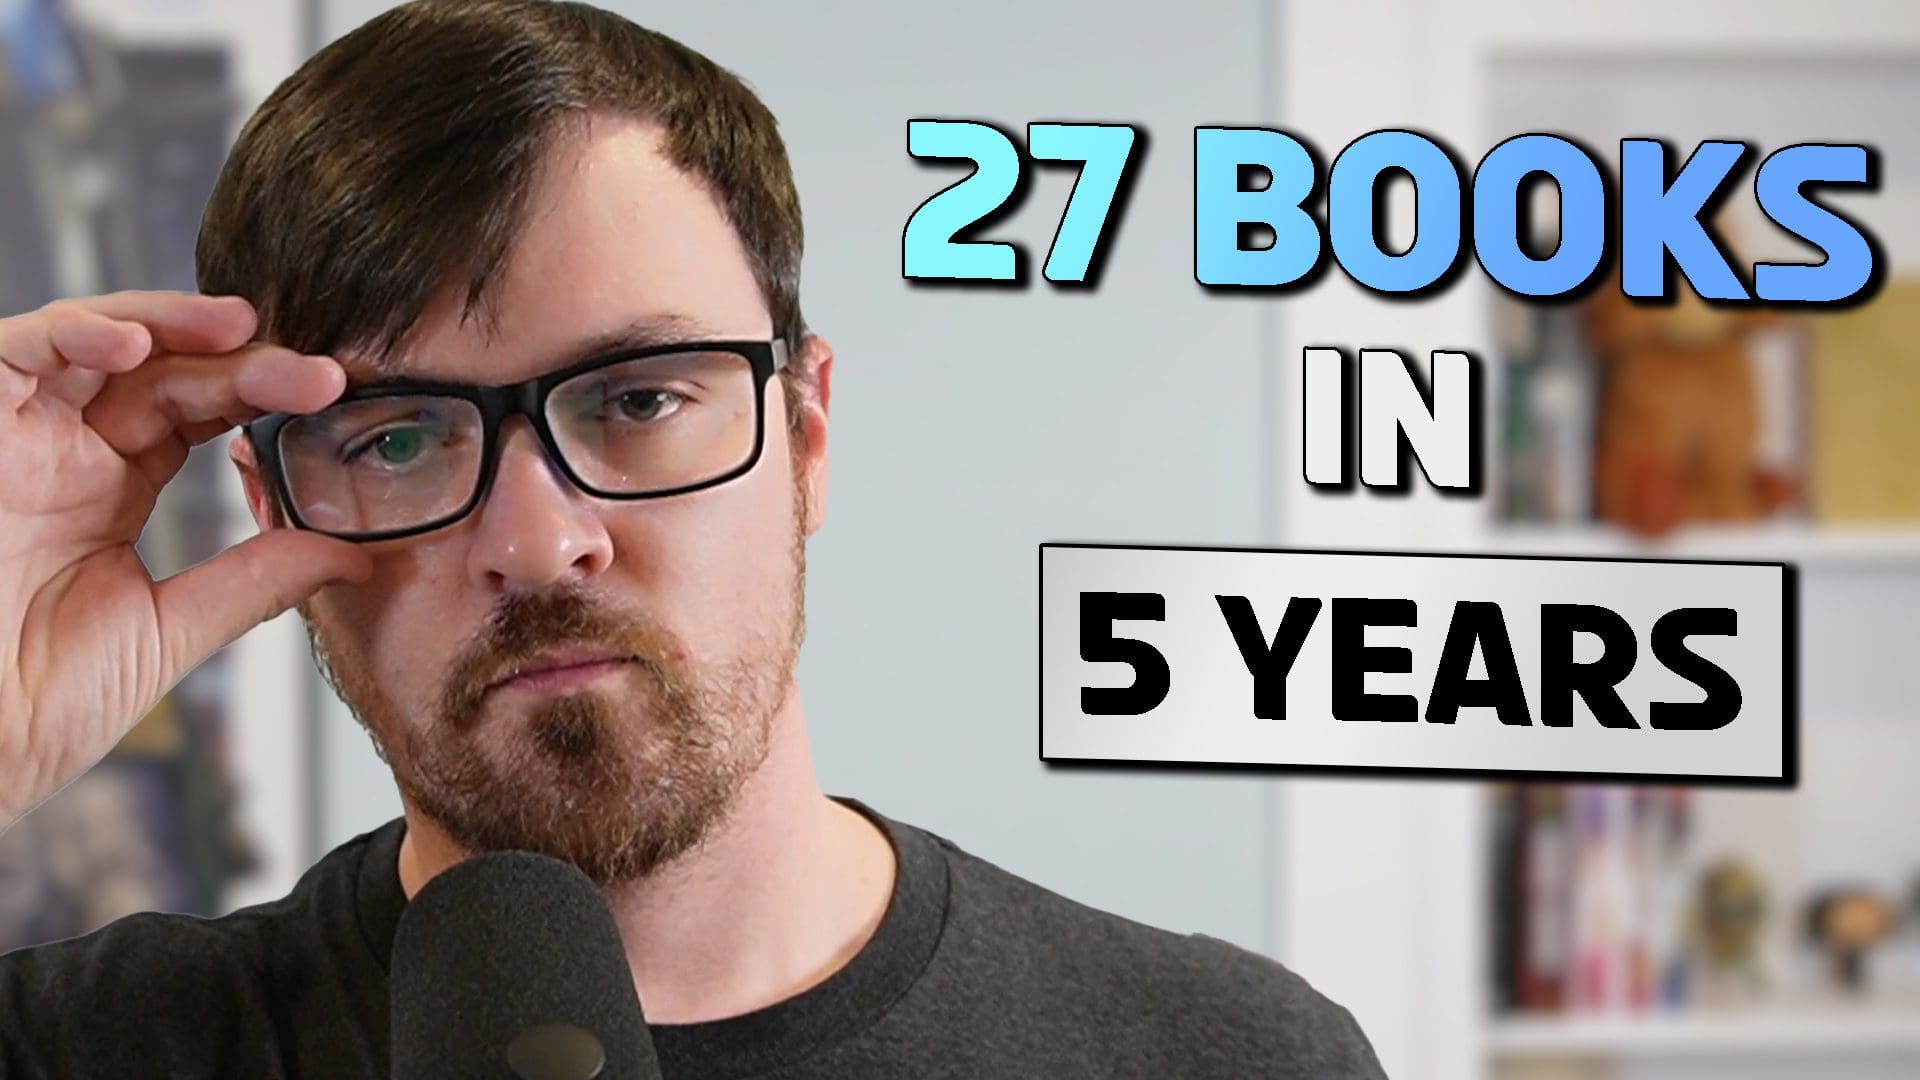 27 Books In 5 Years - Here's How I Did It | Deliberate Practice